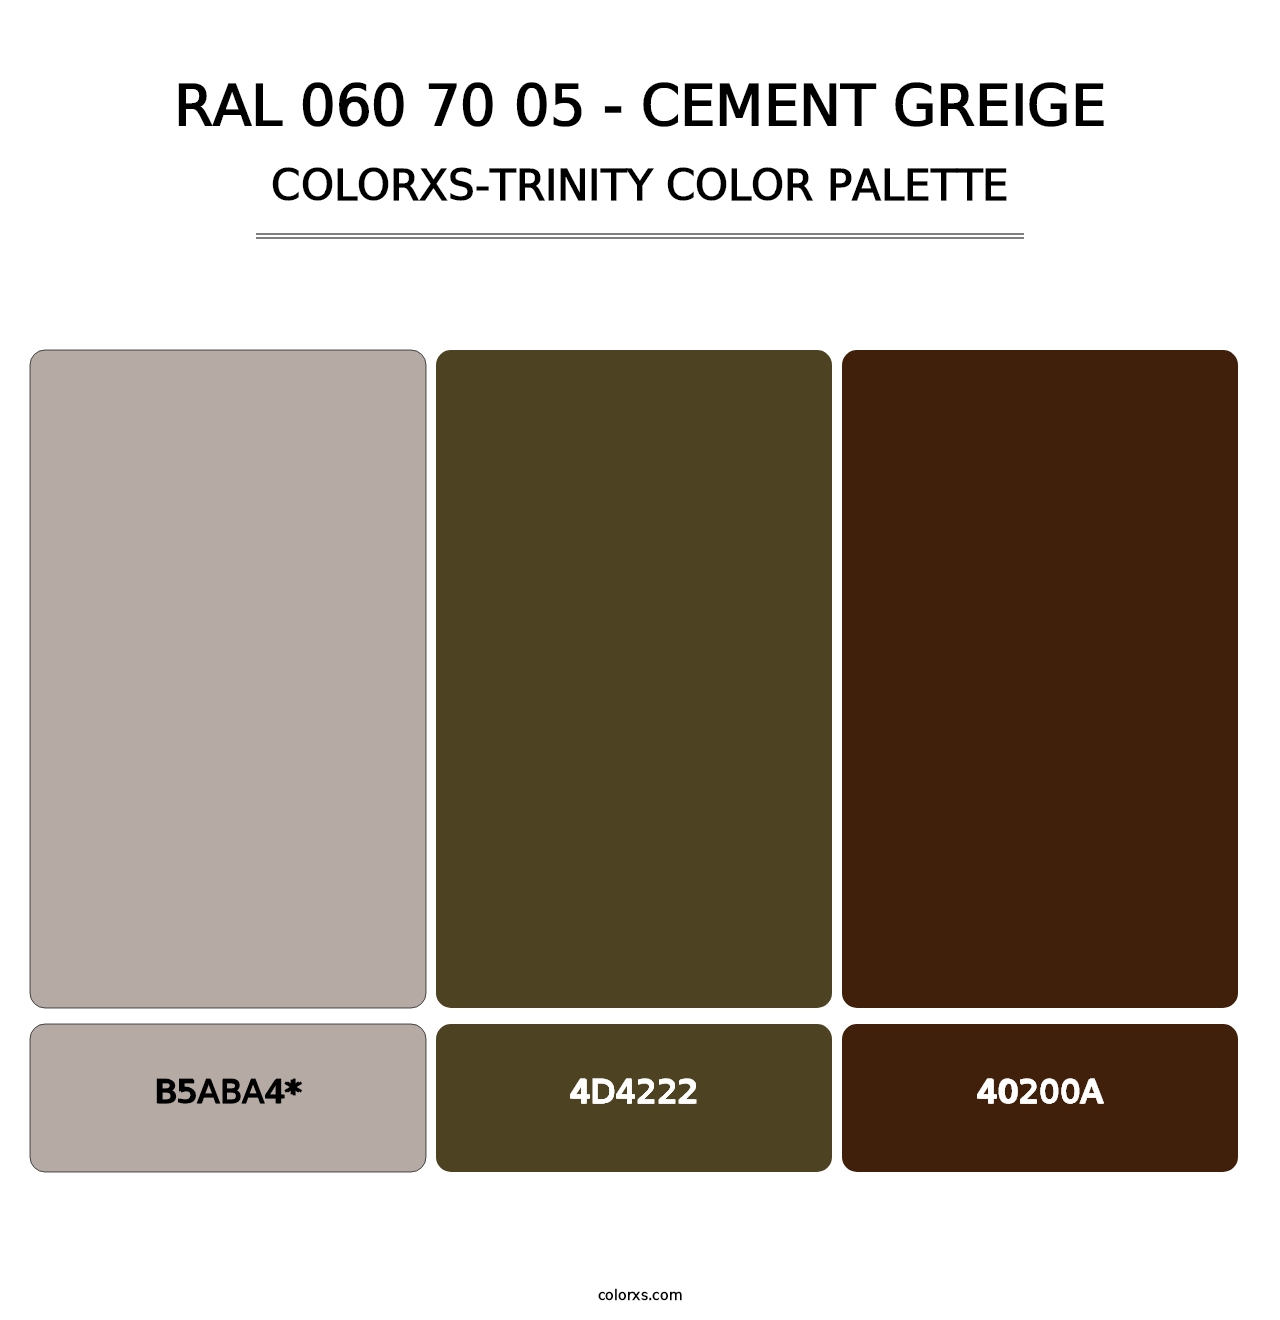 RAL 060 70 05 - Cement Greige - Colorxs Trinity Palette